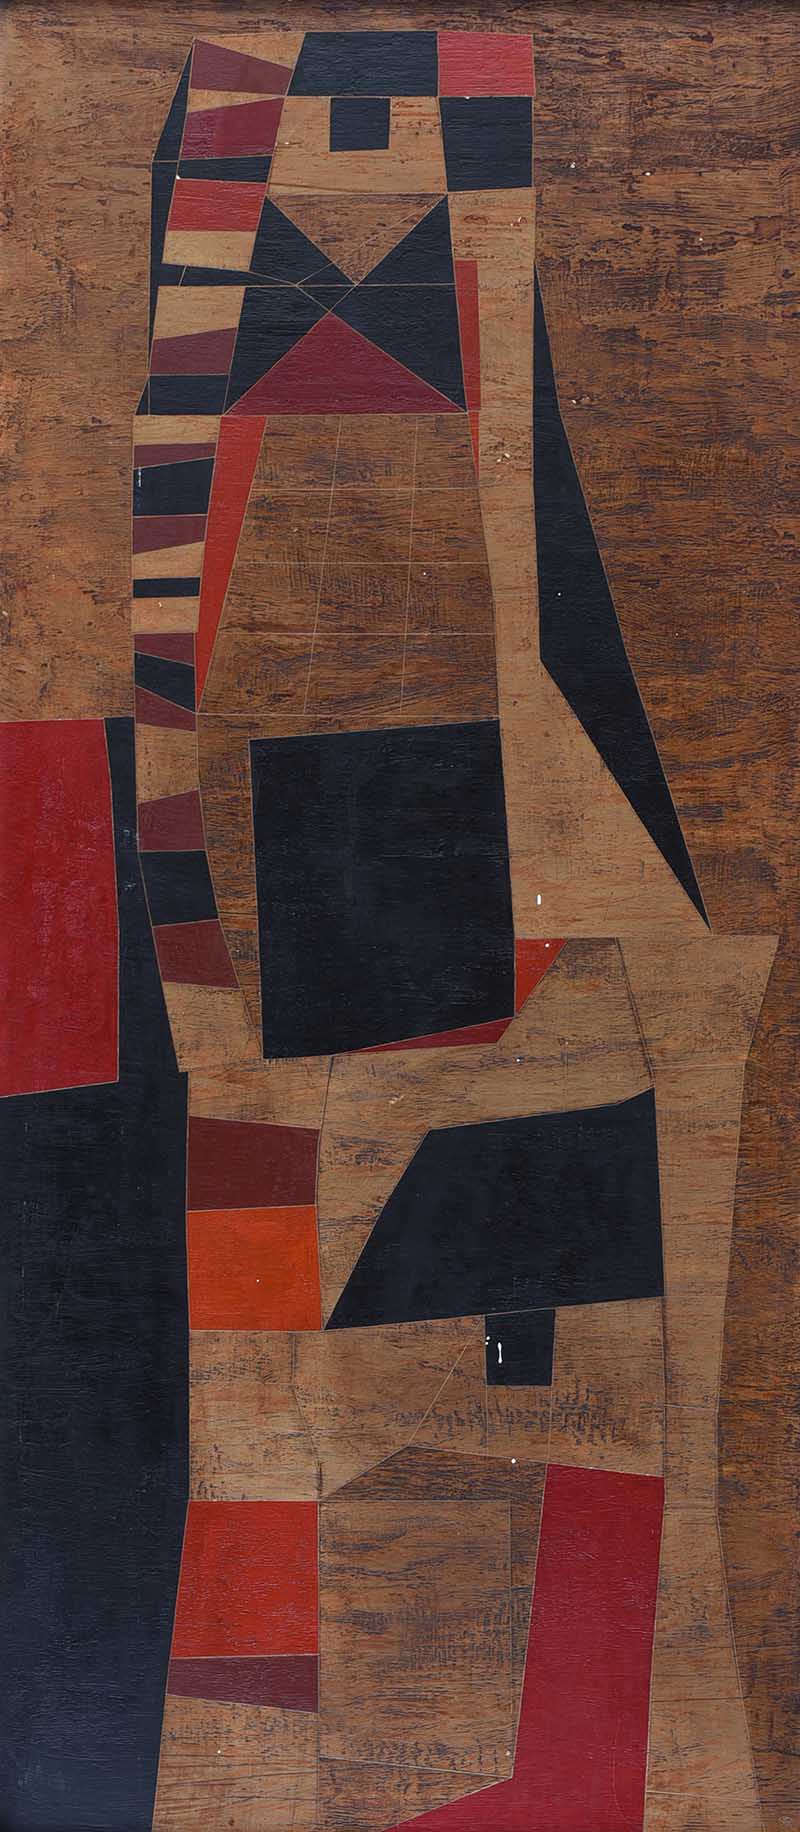 Colin Middleton, RHA RUA - GEOMETRIC ABSTRACT - Oil on Board - 43 x 19 inches - Signed in Monogram